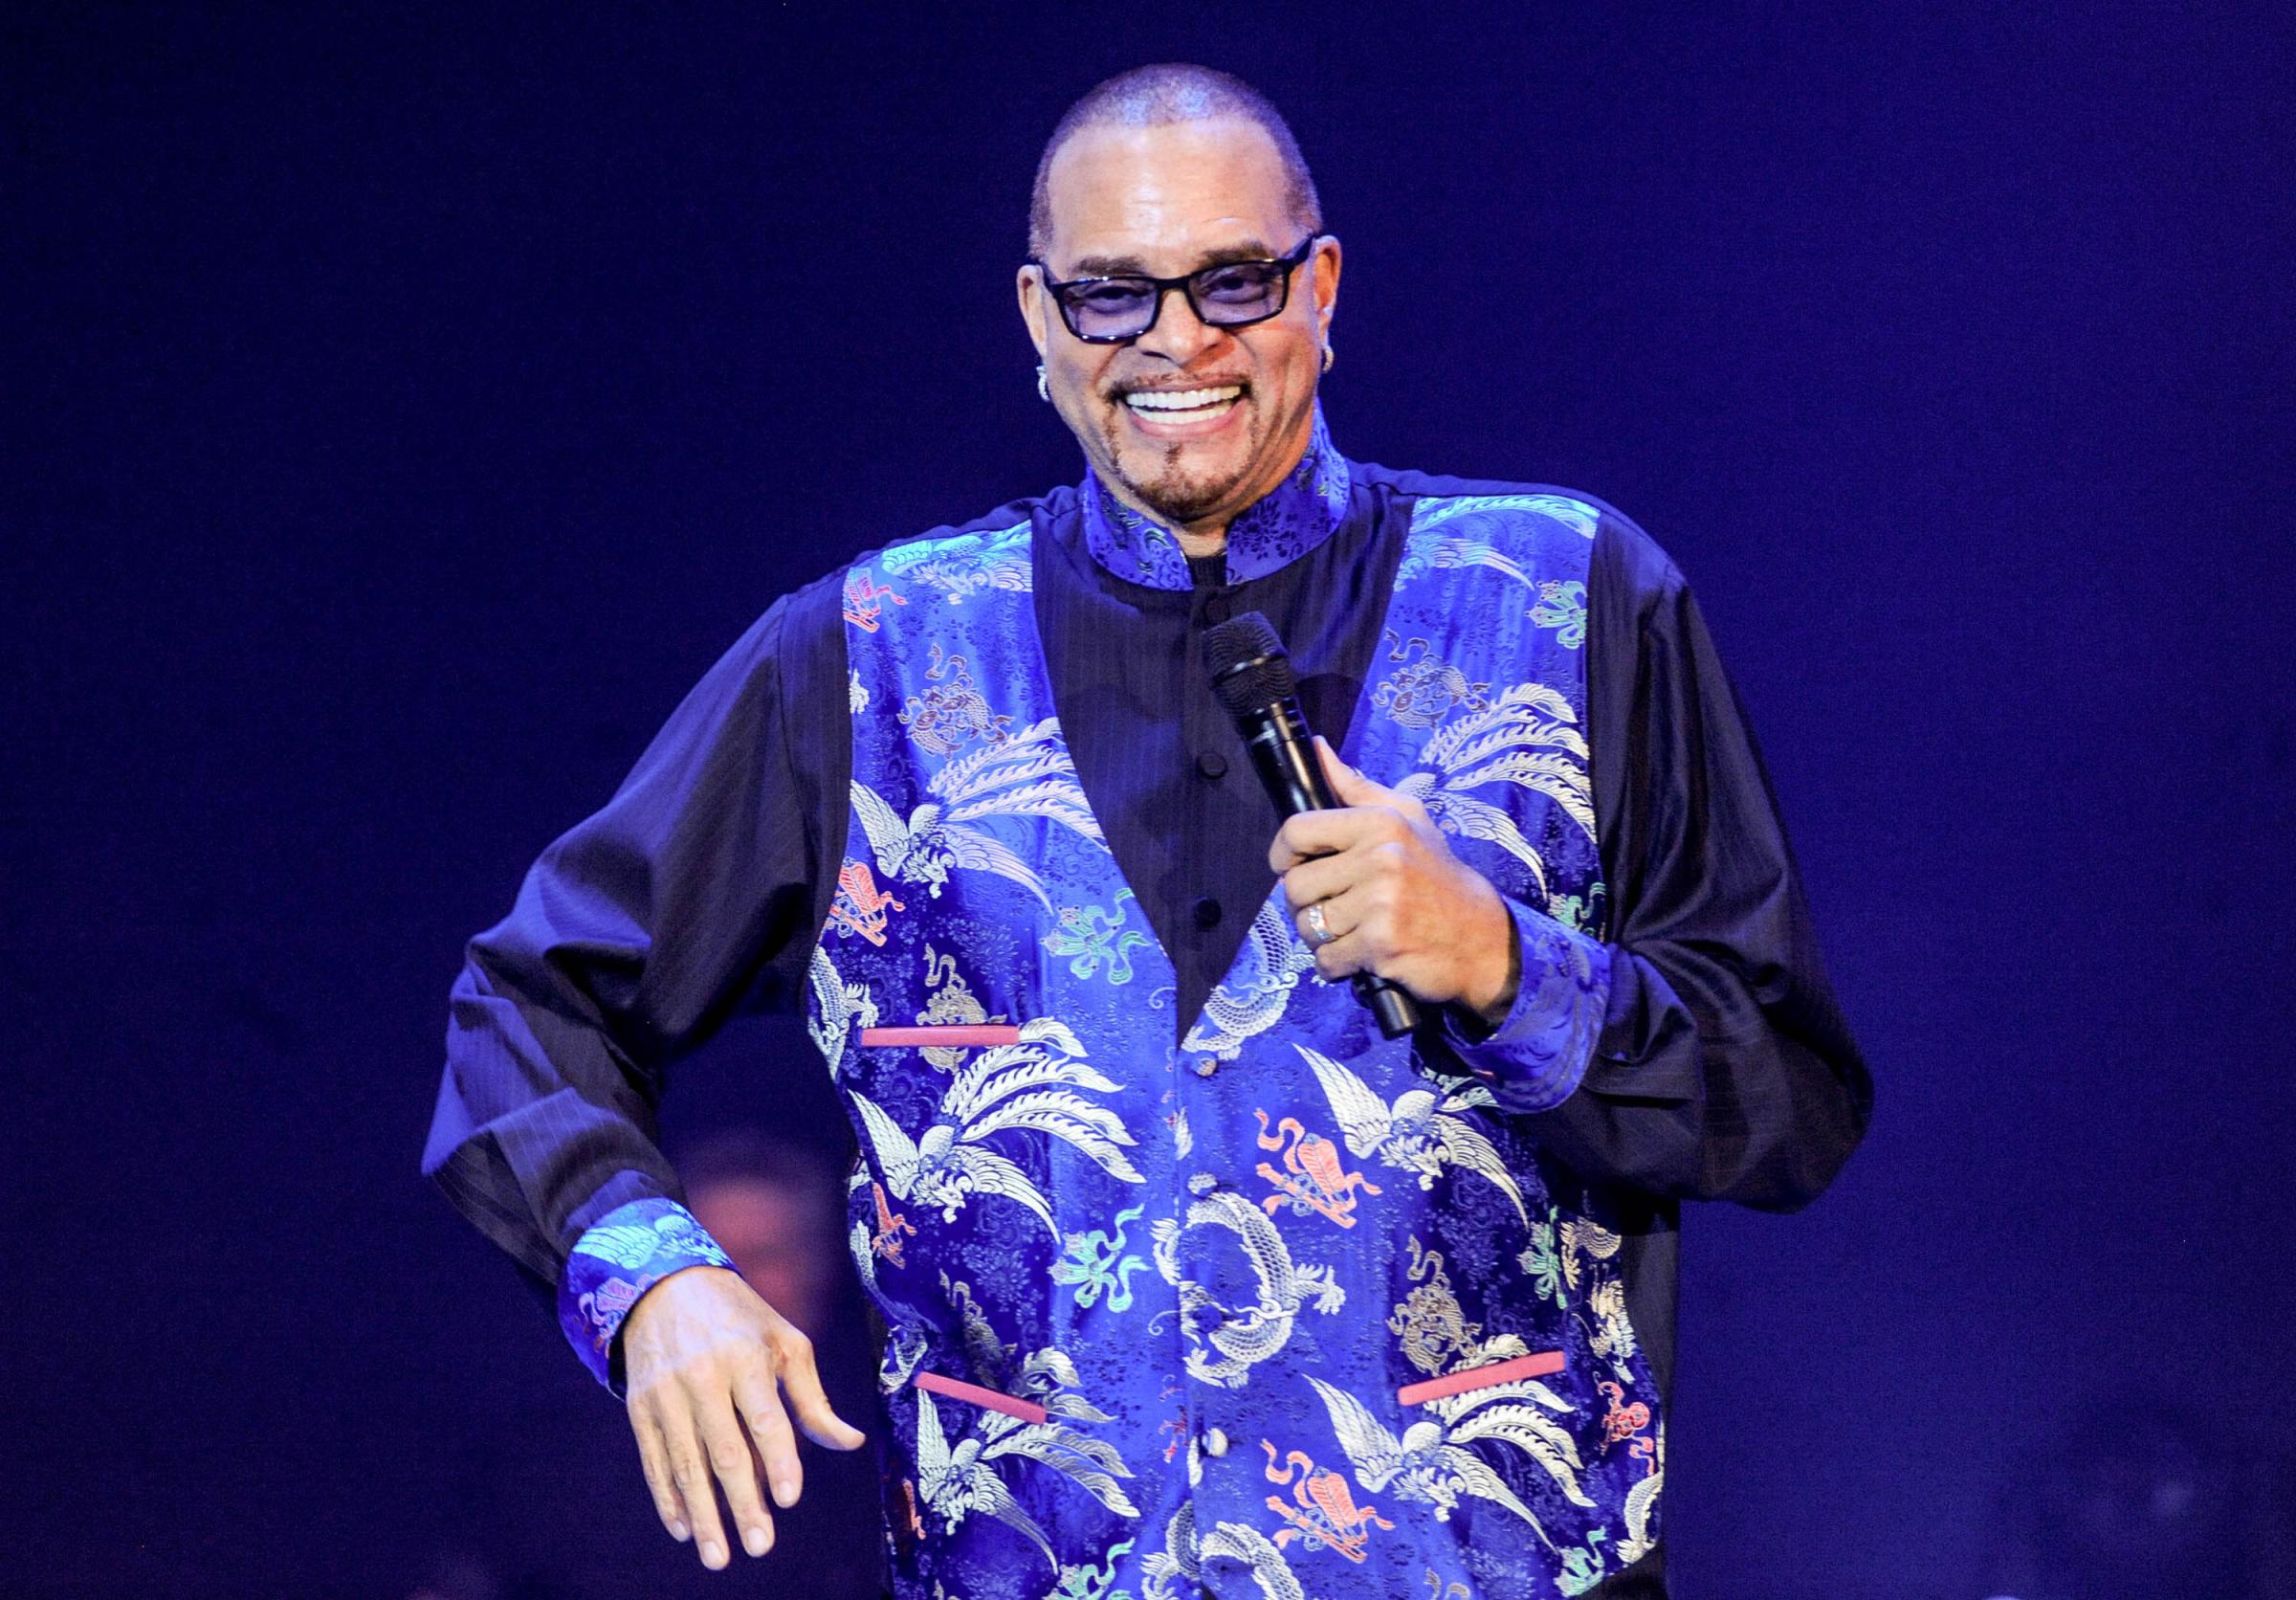 Sinbad performs on Sept. 26, 2015 in Toronto, Canada.